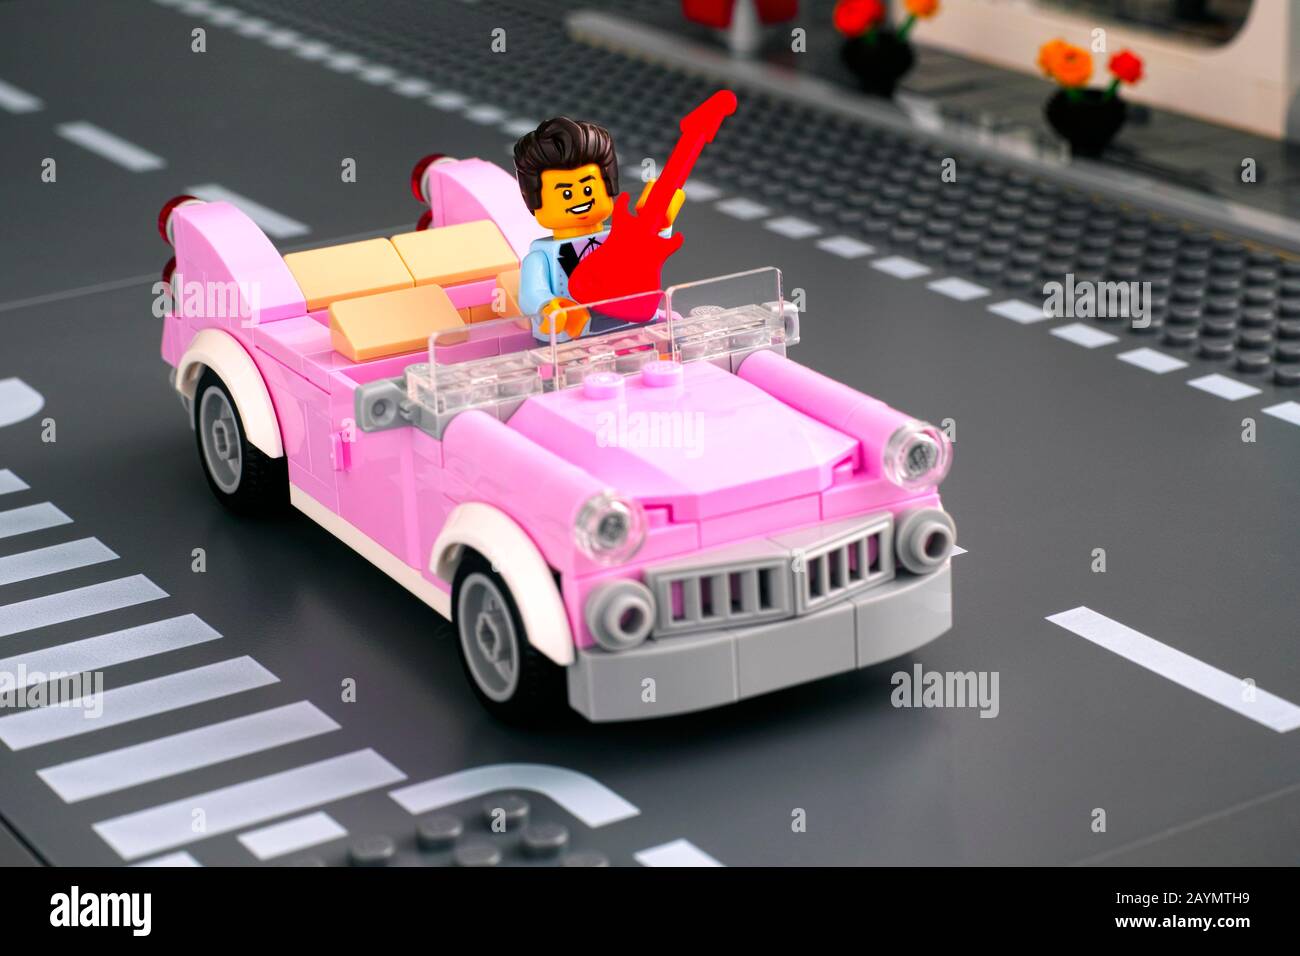 Tambov, Russian Federation - January 22, 2020 Lego rock n roll star minifigure with guitar in pink 1950s-style convertible on the road. Studio shot. Stock Photo